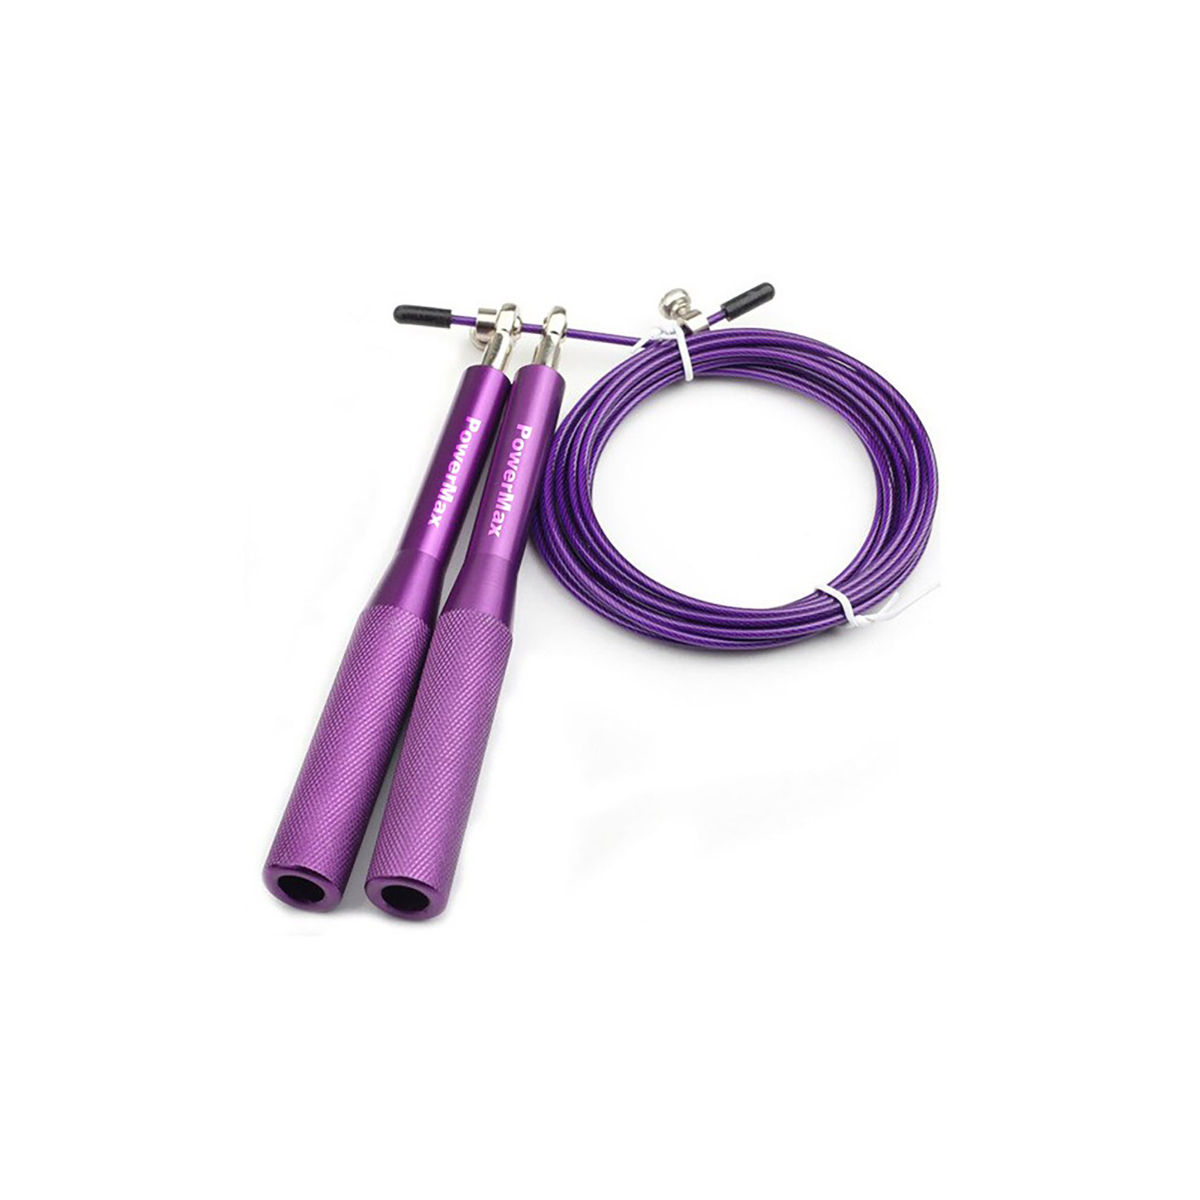 PowerMax Fitness JA-3 (Purple) Exercise Speed Jump Rope With Adjustable Cable with Anti-Slip Handle